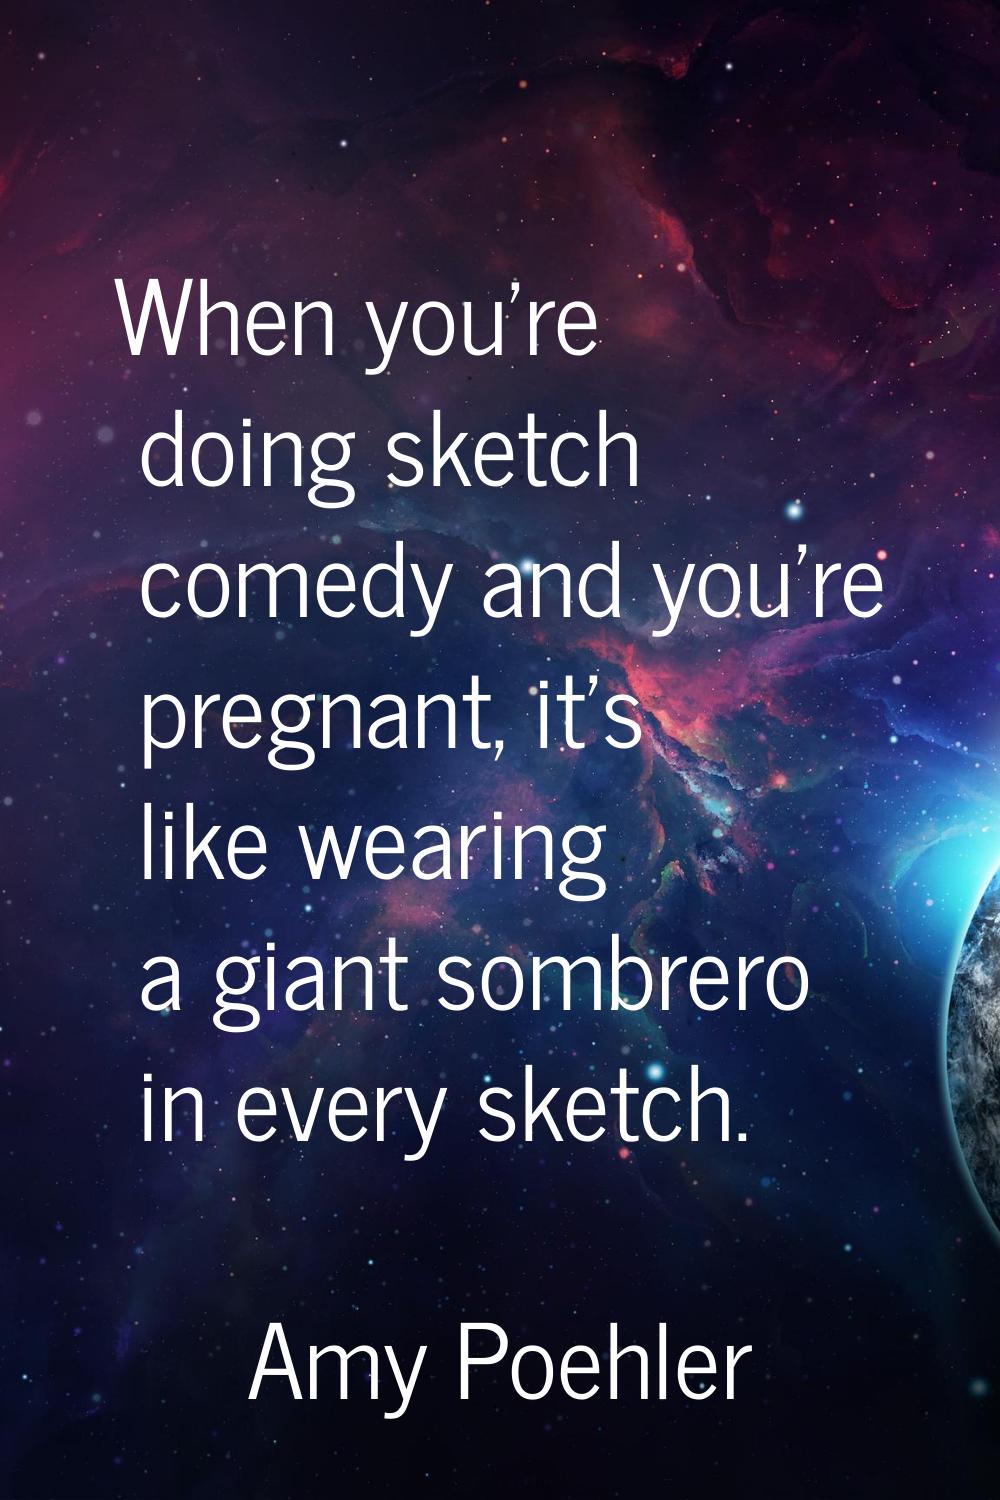 When you're doing sketch comedy and you're pregnant, it's like wearing a giant sombrero in every sk